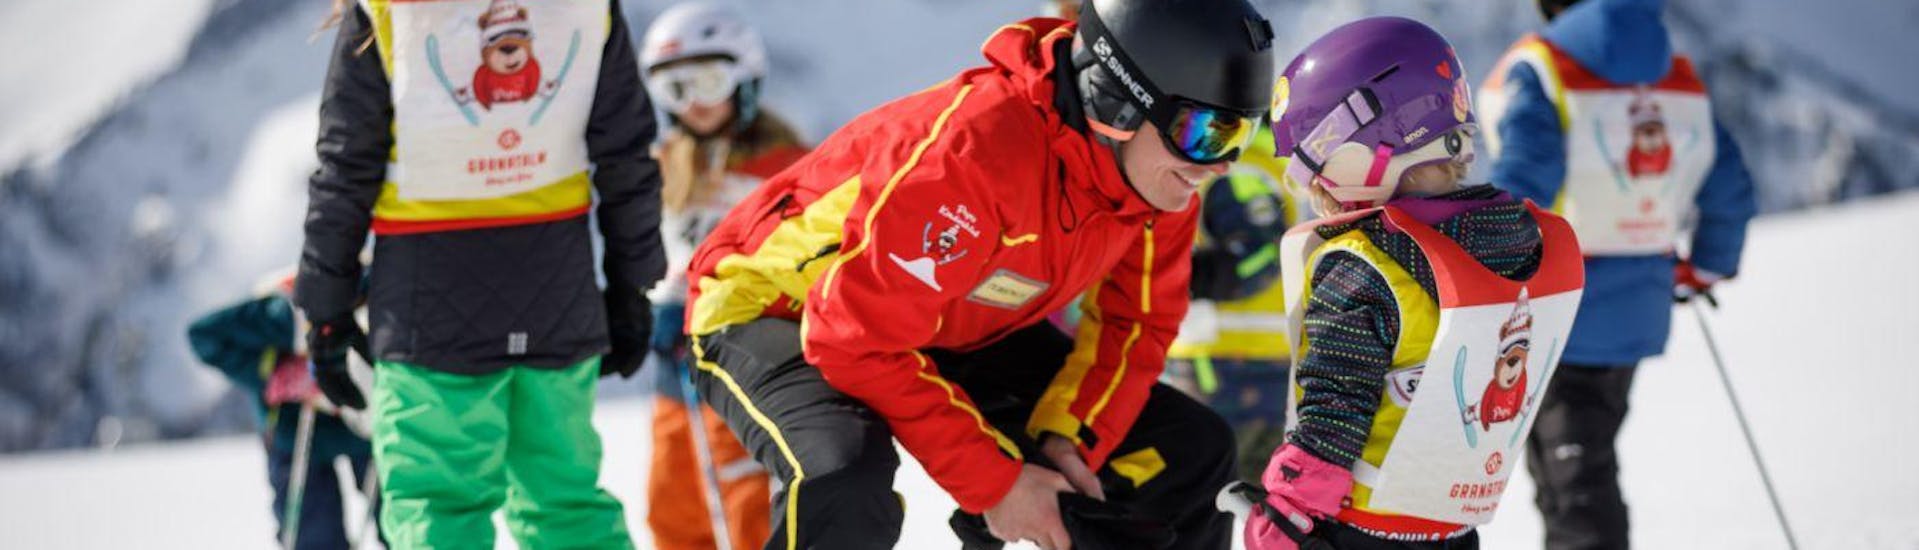 Kids Ski Lessons (4-14 y.) for First Timers with Skischule Sunny Finkenberg - Hero image